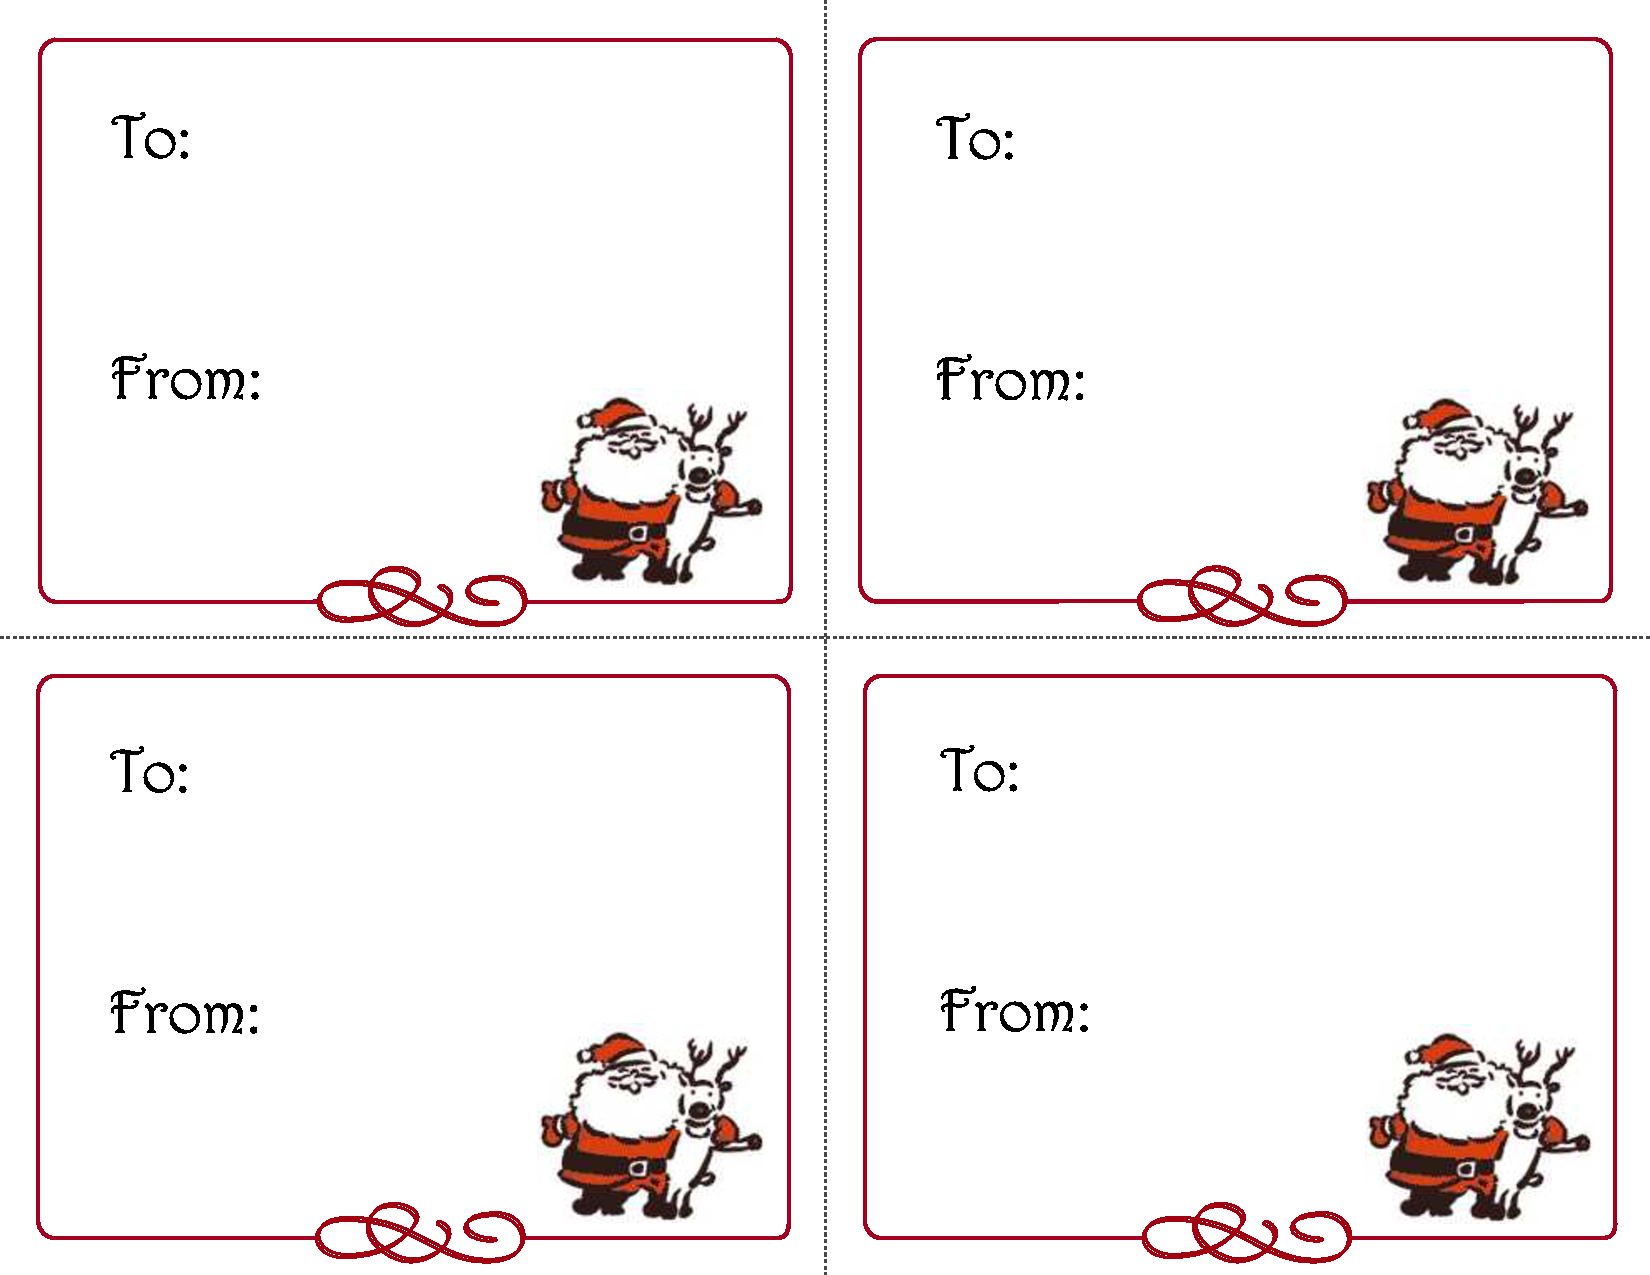 Homemade Gift Card Template ] – Free Downloadable Intended For Homemade Christmas Gift Certificates Templates